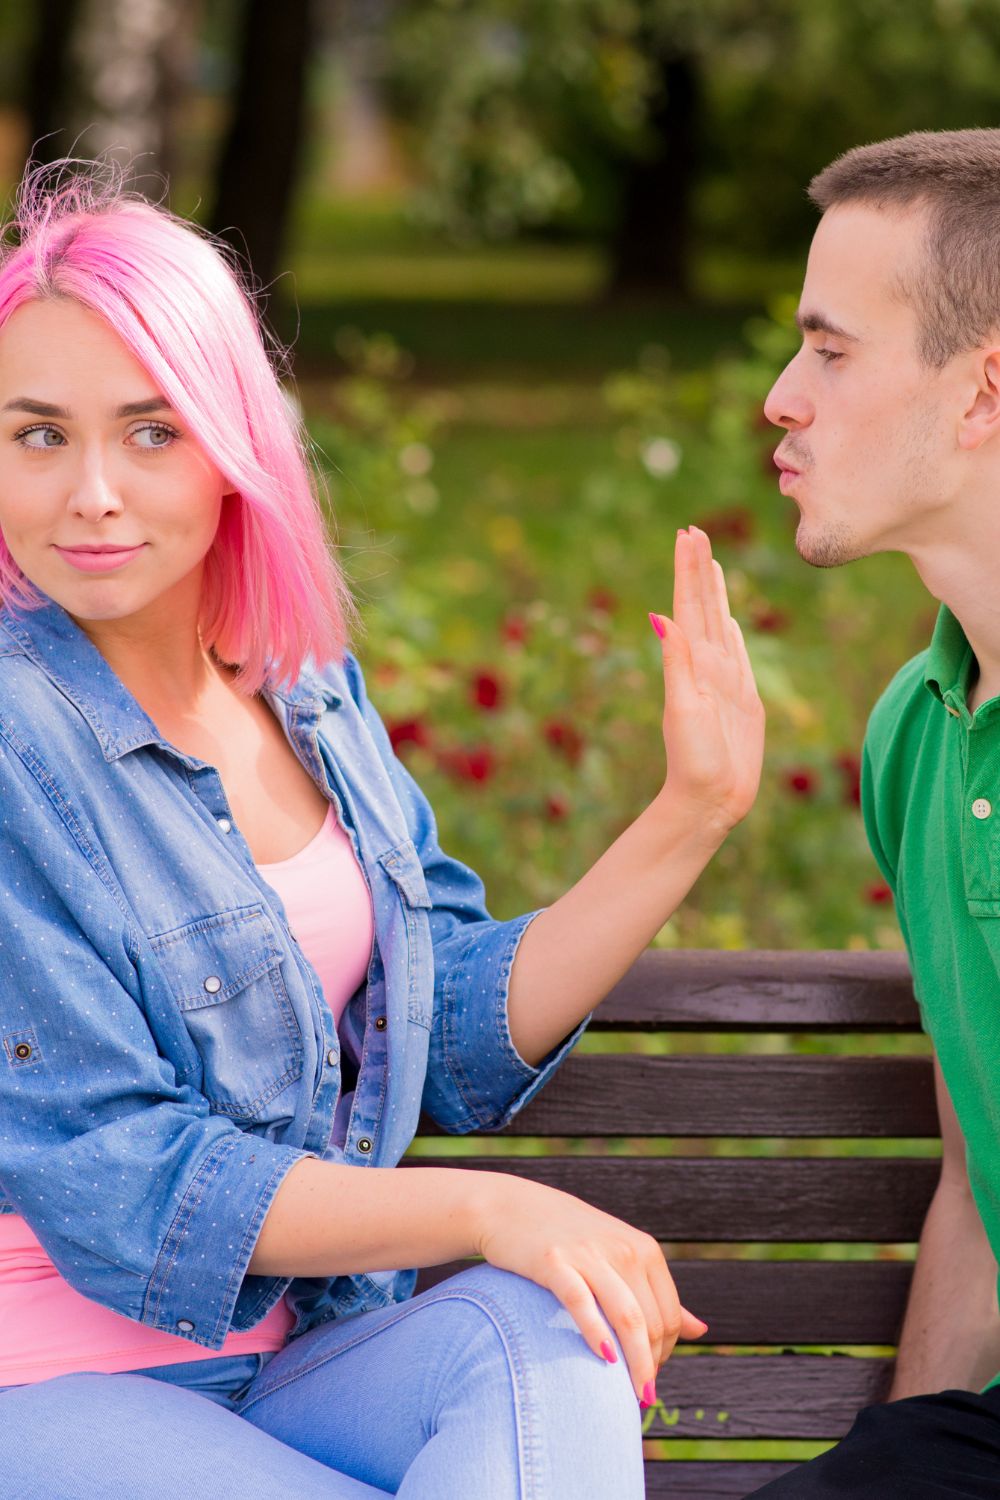 How to deal with a guy playing mind games